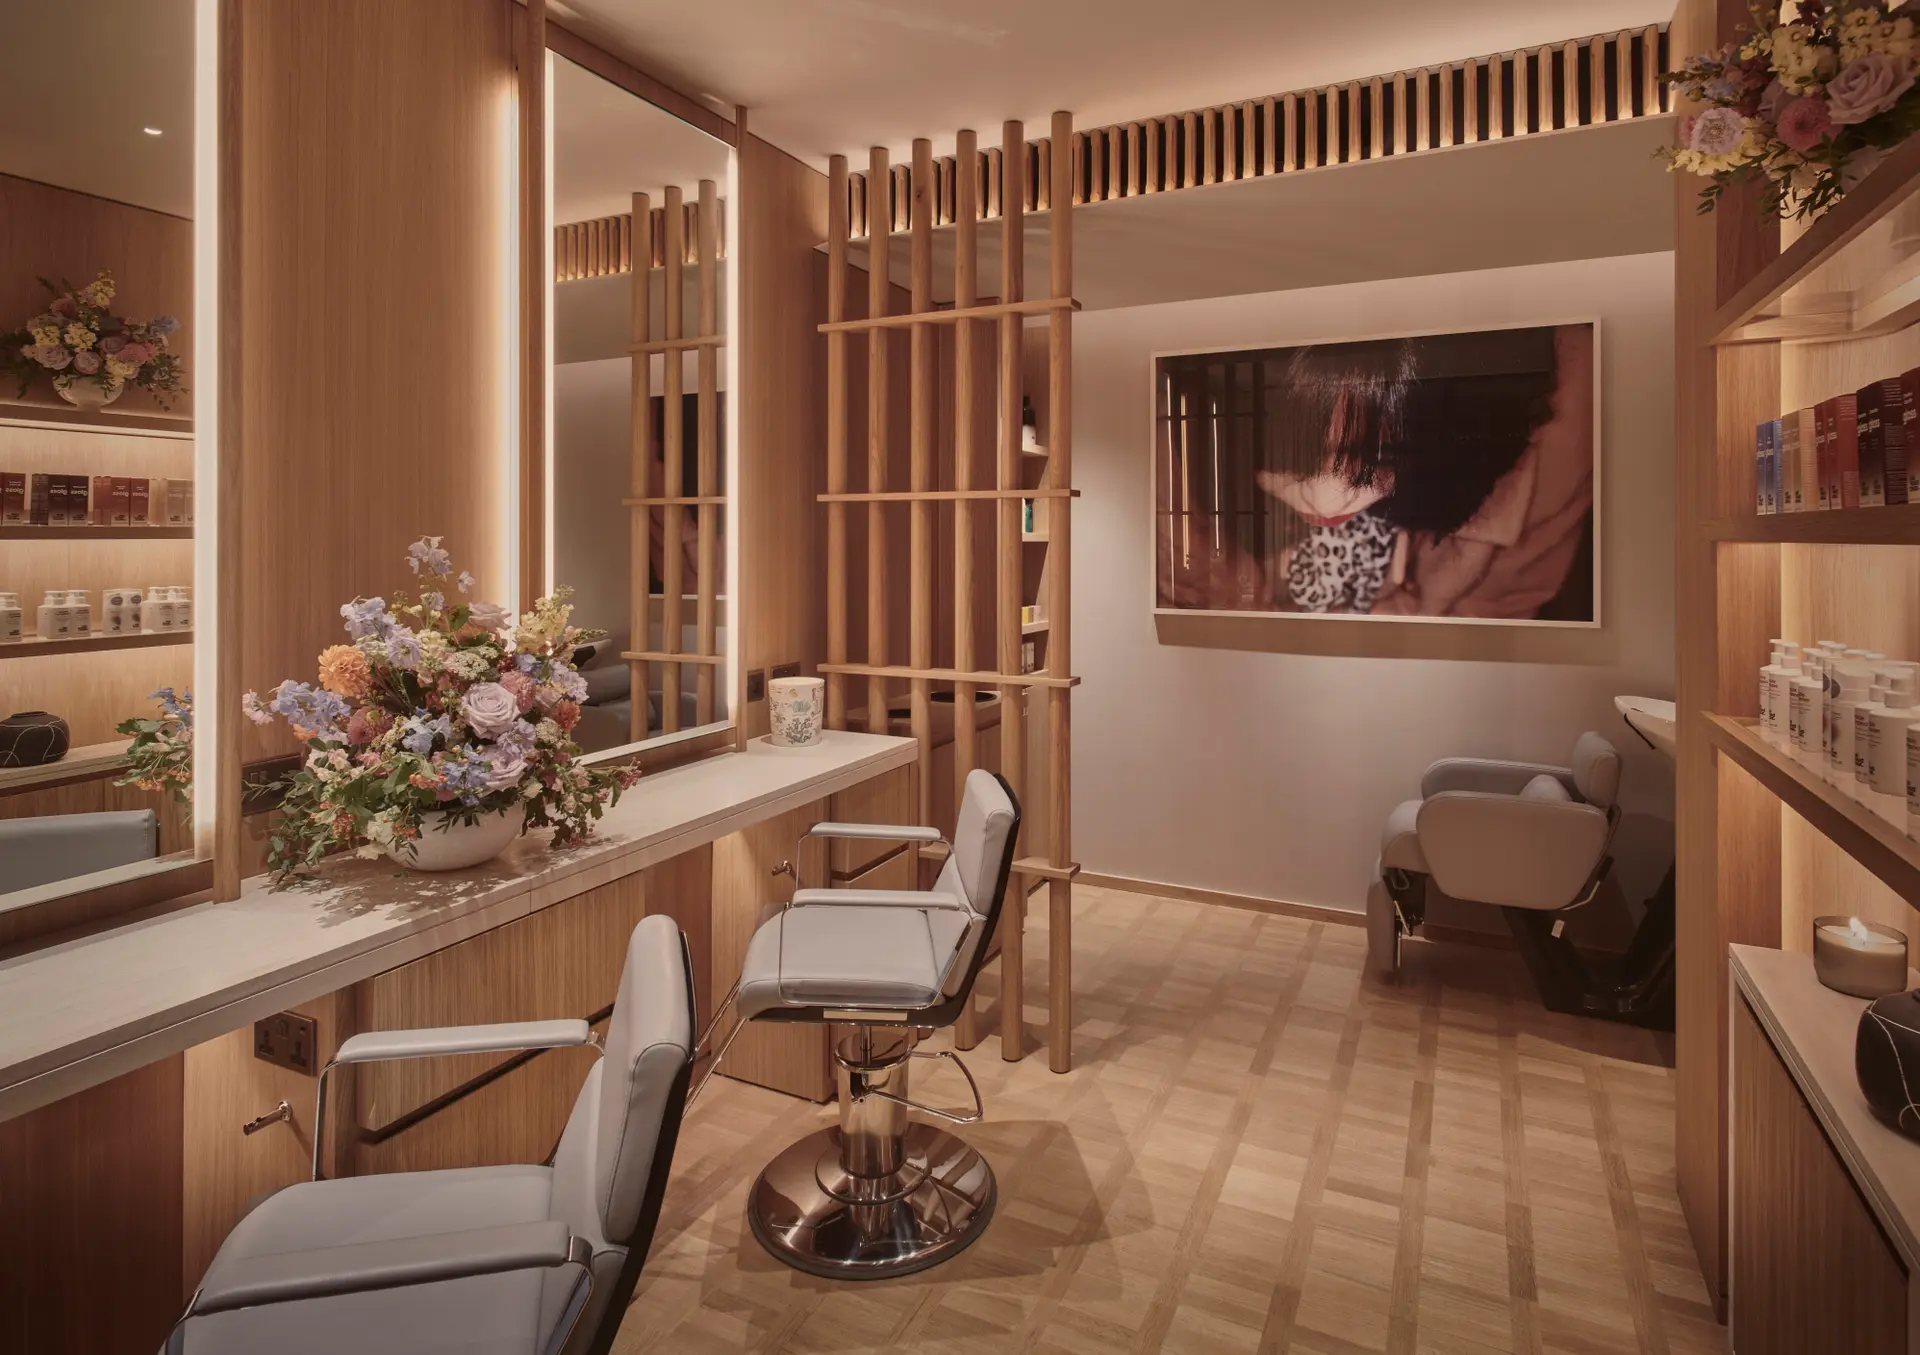 Hotels News - Claridge's opens first ever spa - and it's way underground!